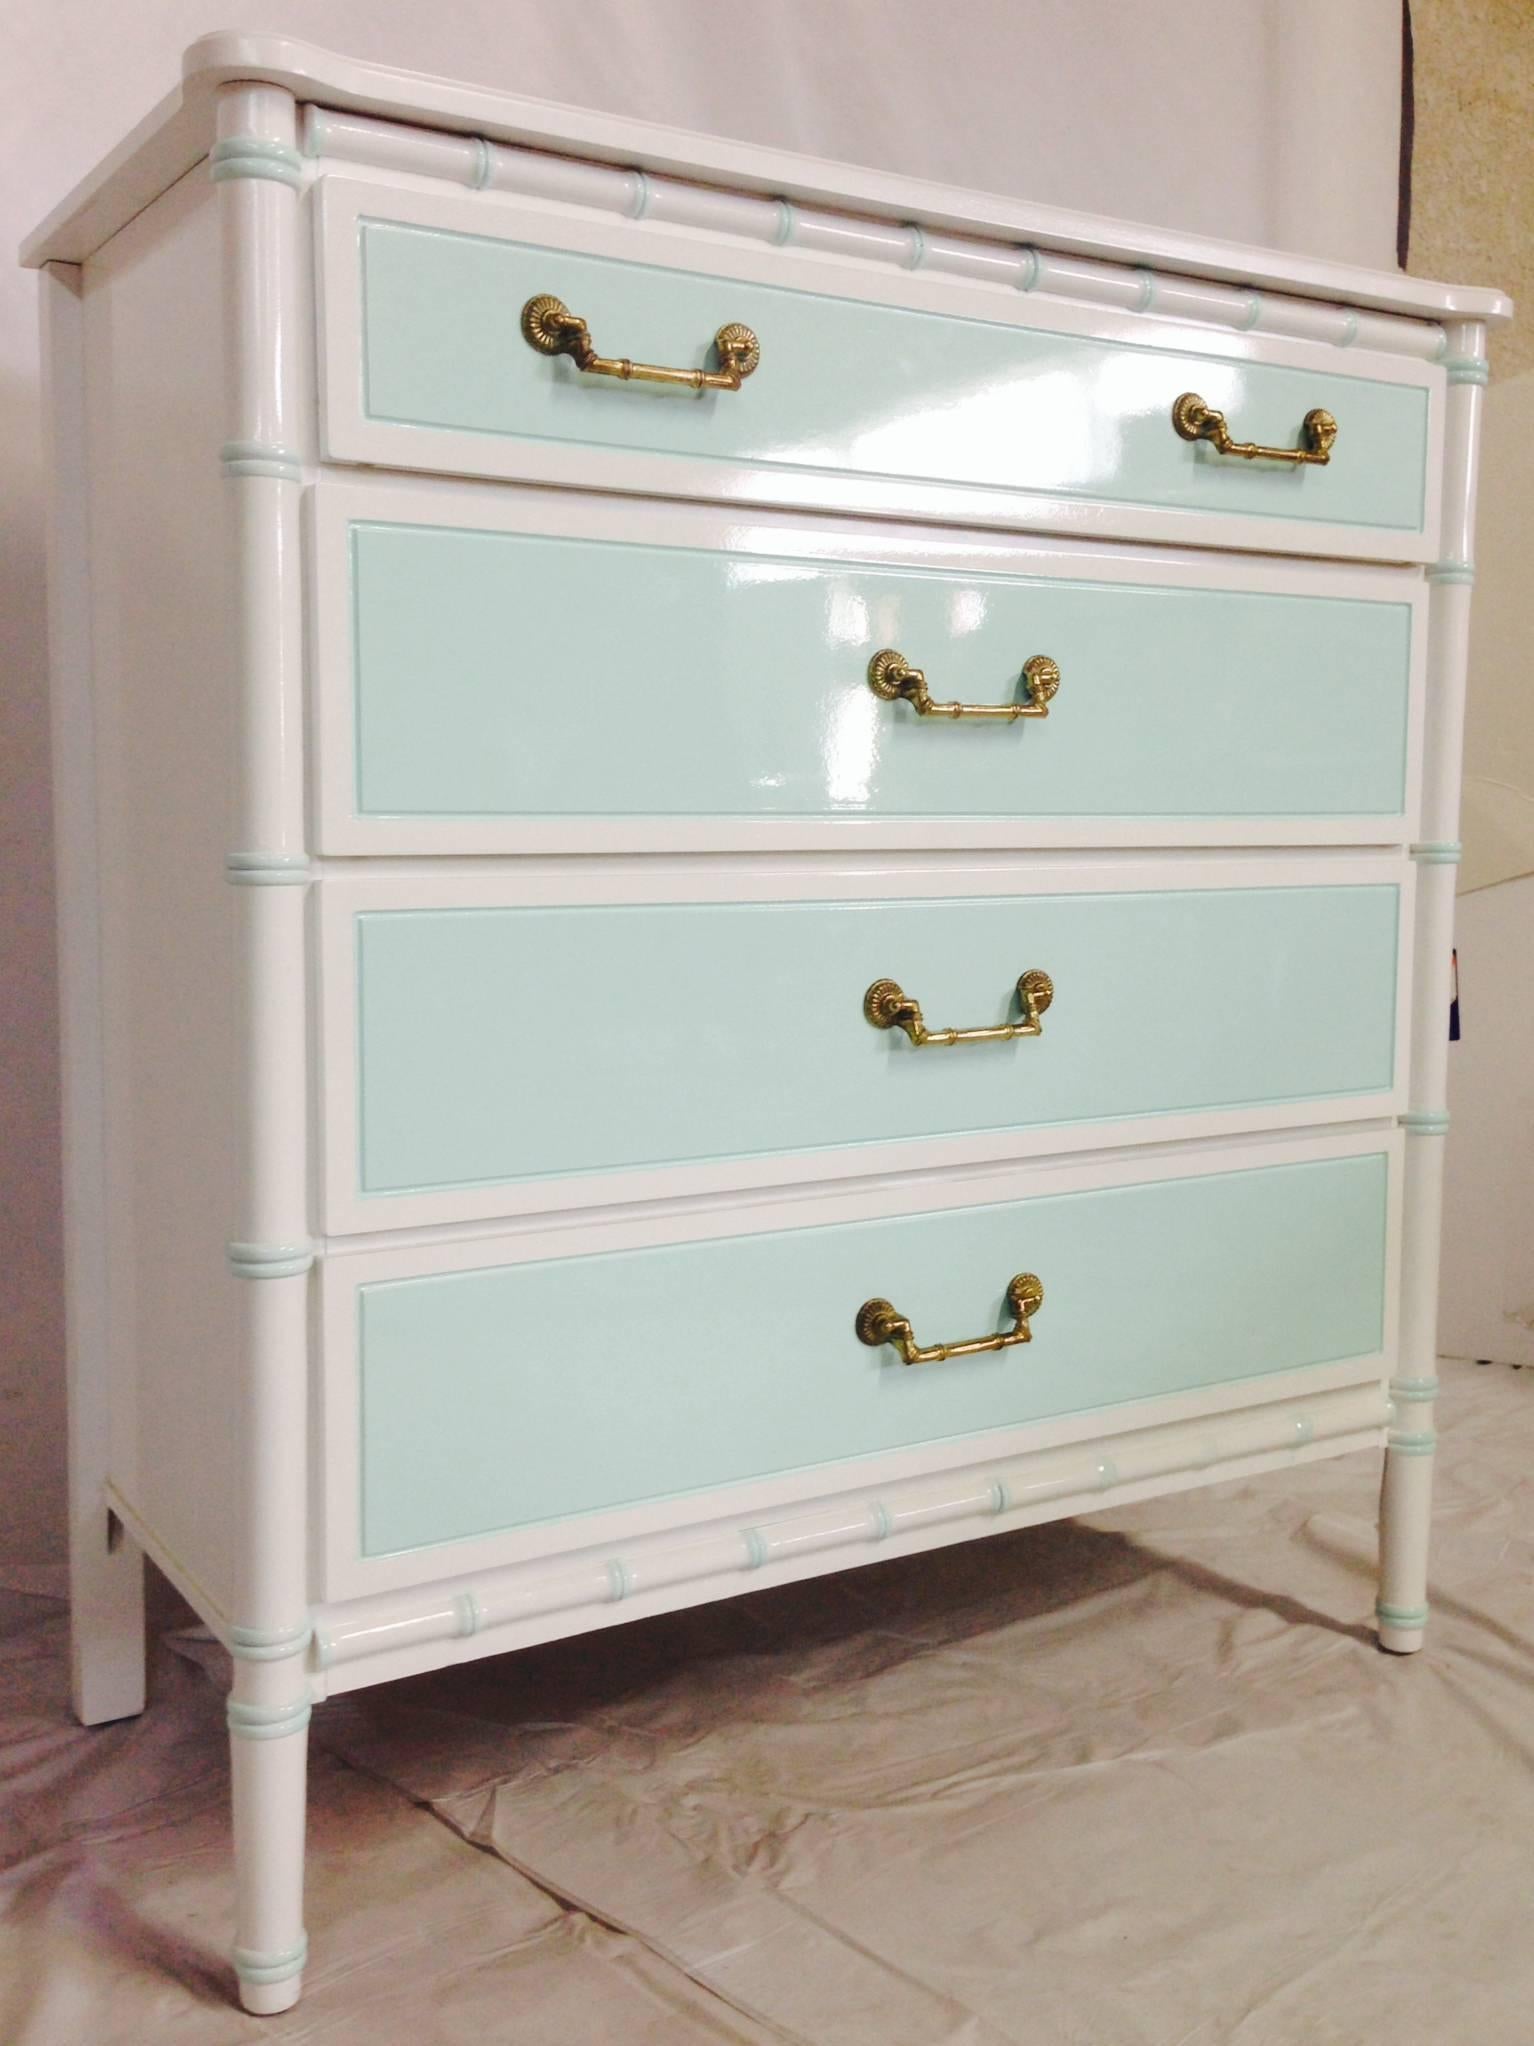 Newly refurbished, faux-bamboo four-drawer tall dresser. Finished in two-tone mint and white high-gloss lacquer paint. Original gold faux-bamboo solid brass hardware restored. Finished on all four sides including, interior of drawers. Light Mint is